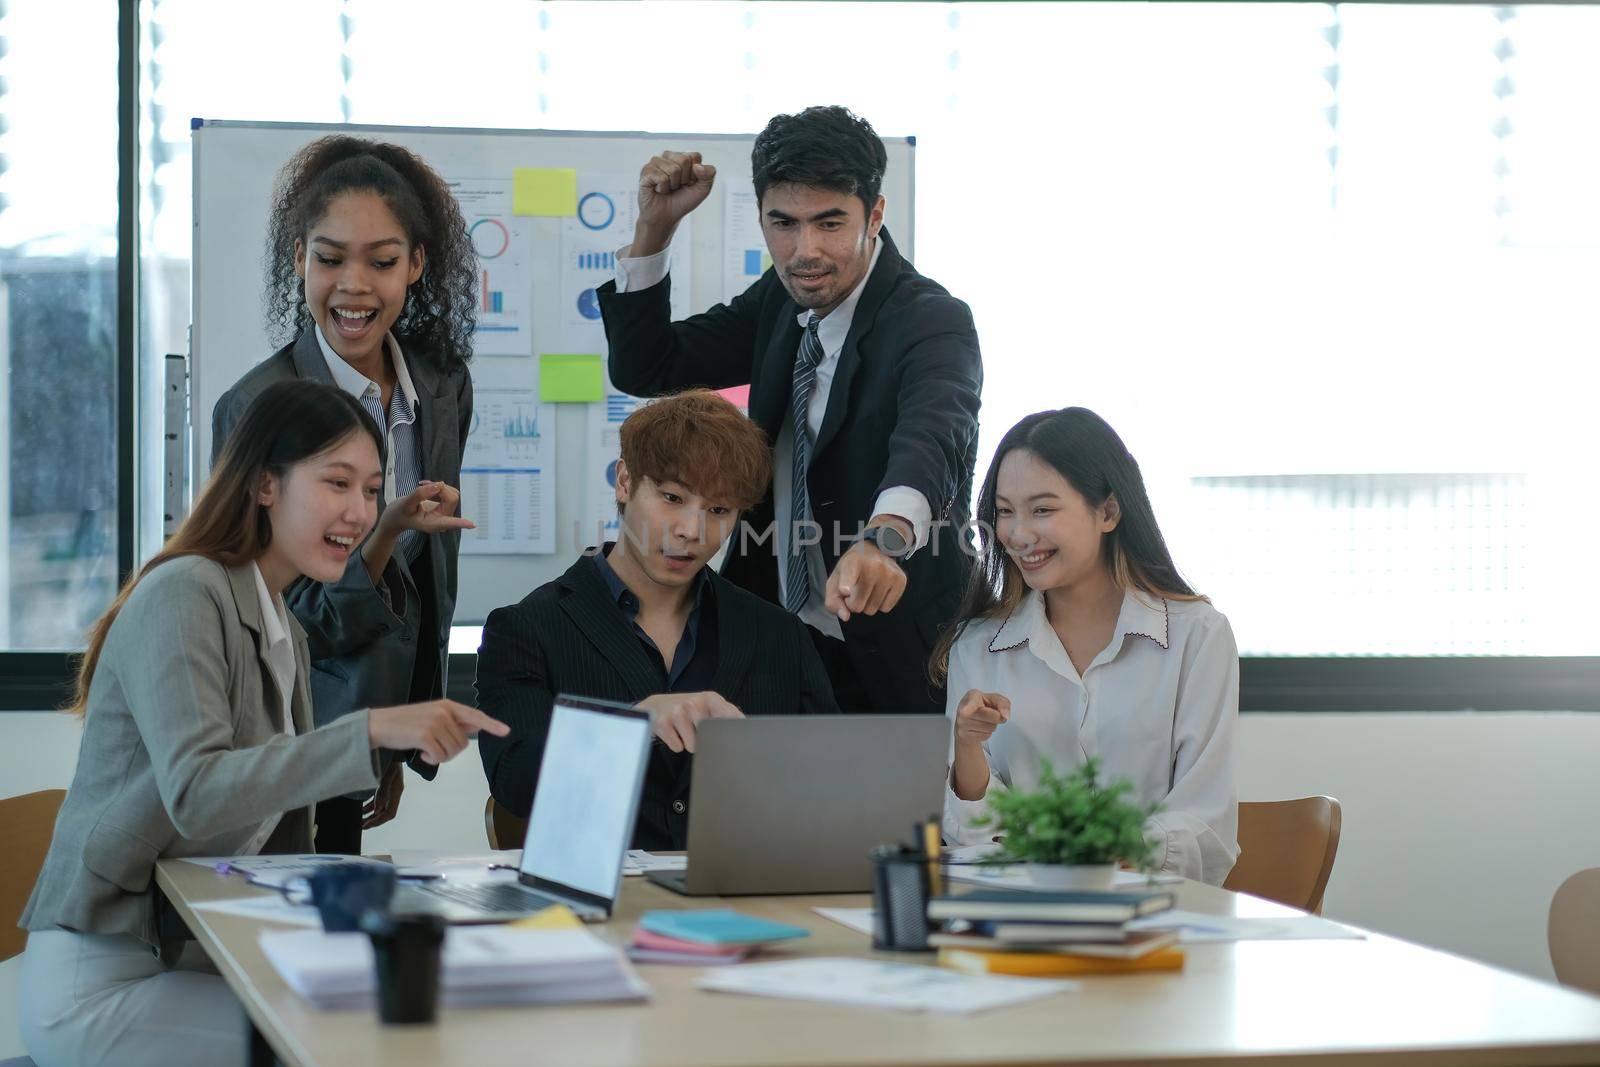 Young happy Asian business man, woman work together, celebrate success in start up office. Creative team brainstorm meeting, businesspeople colleague partnership or office coworker teamwork concept.